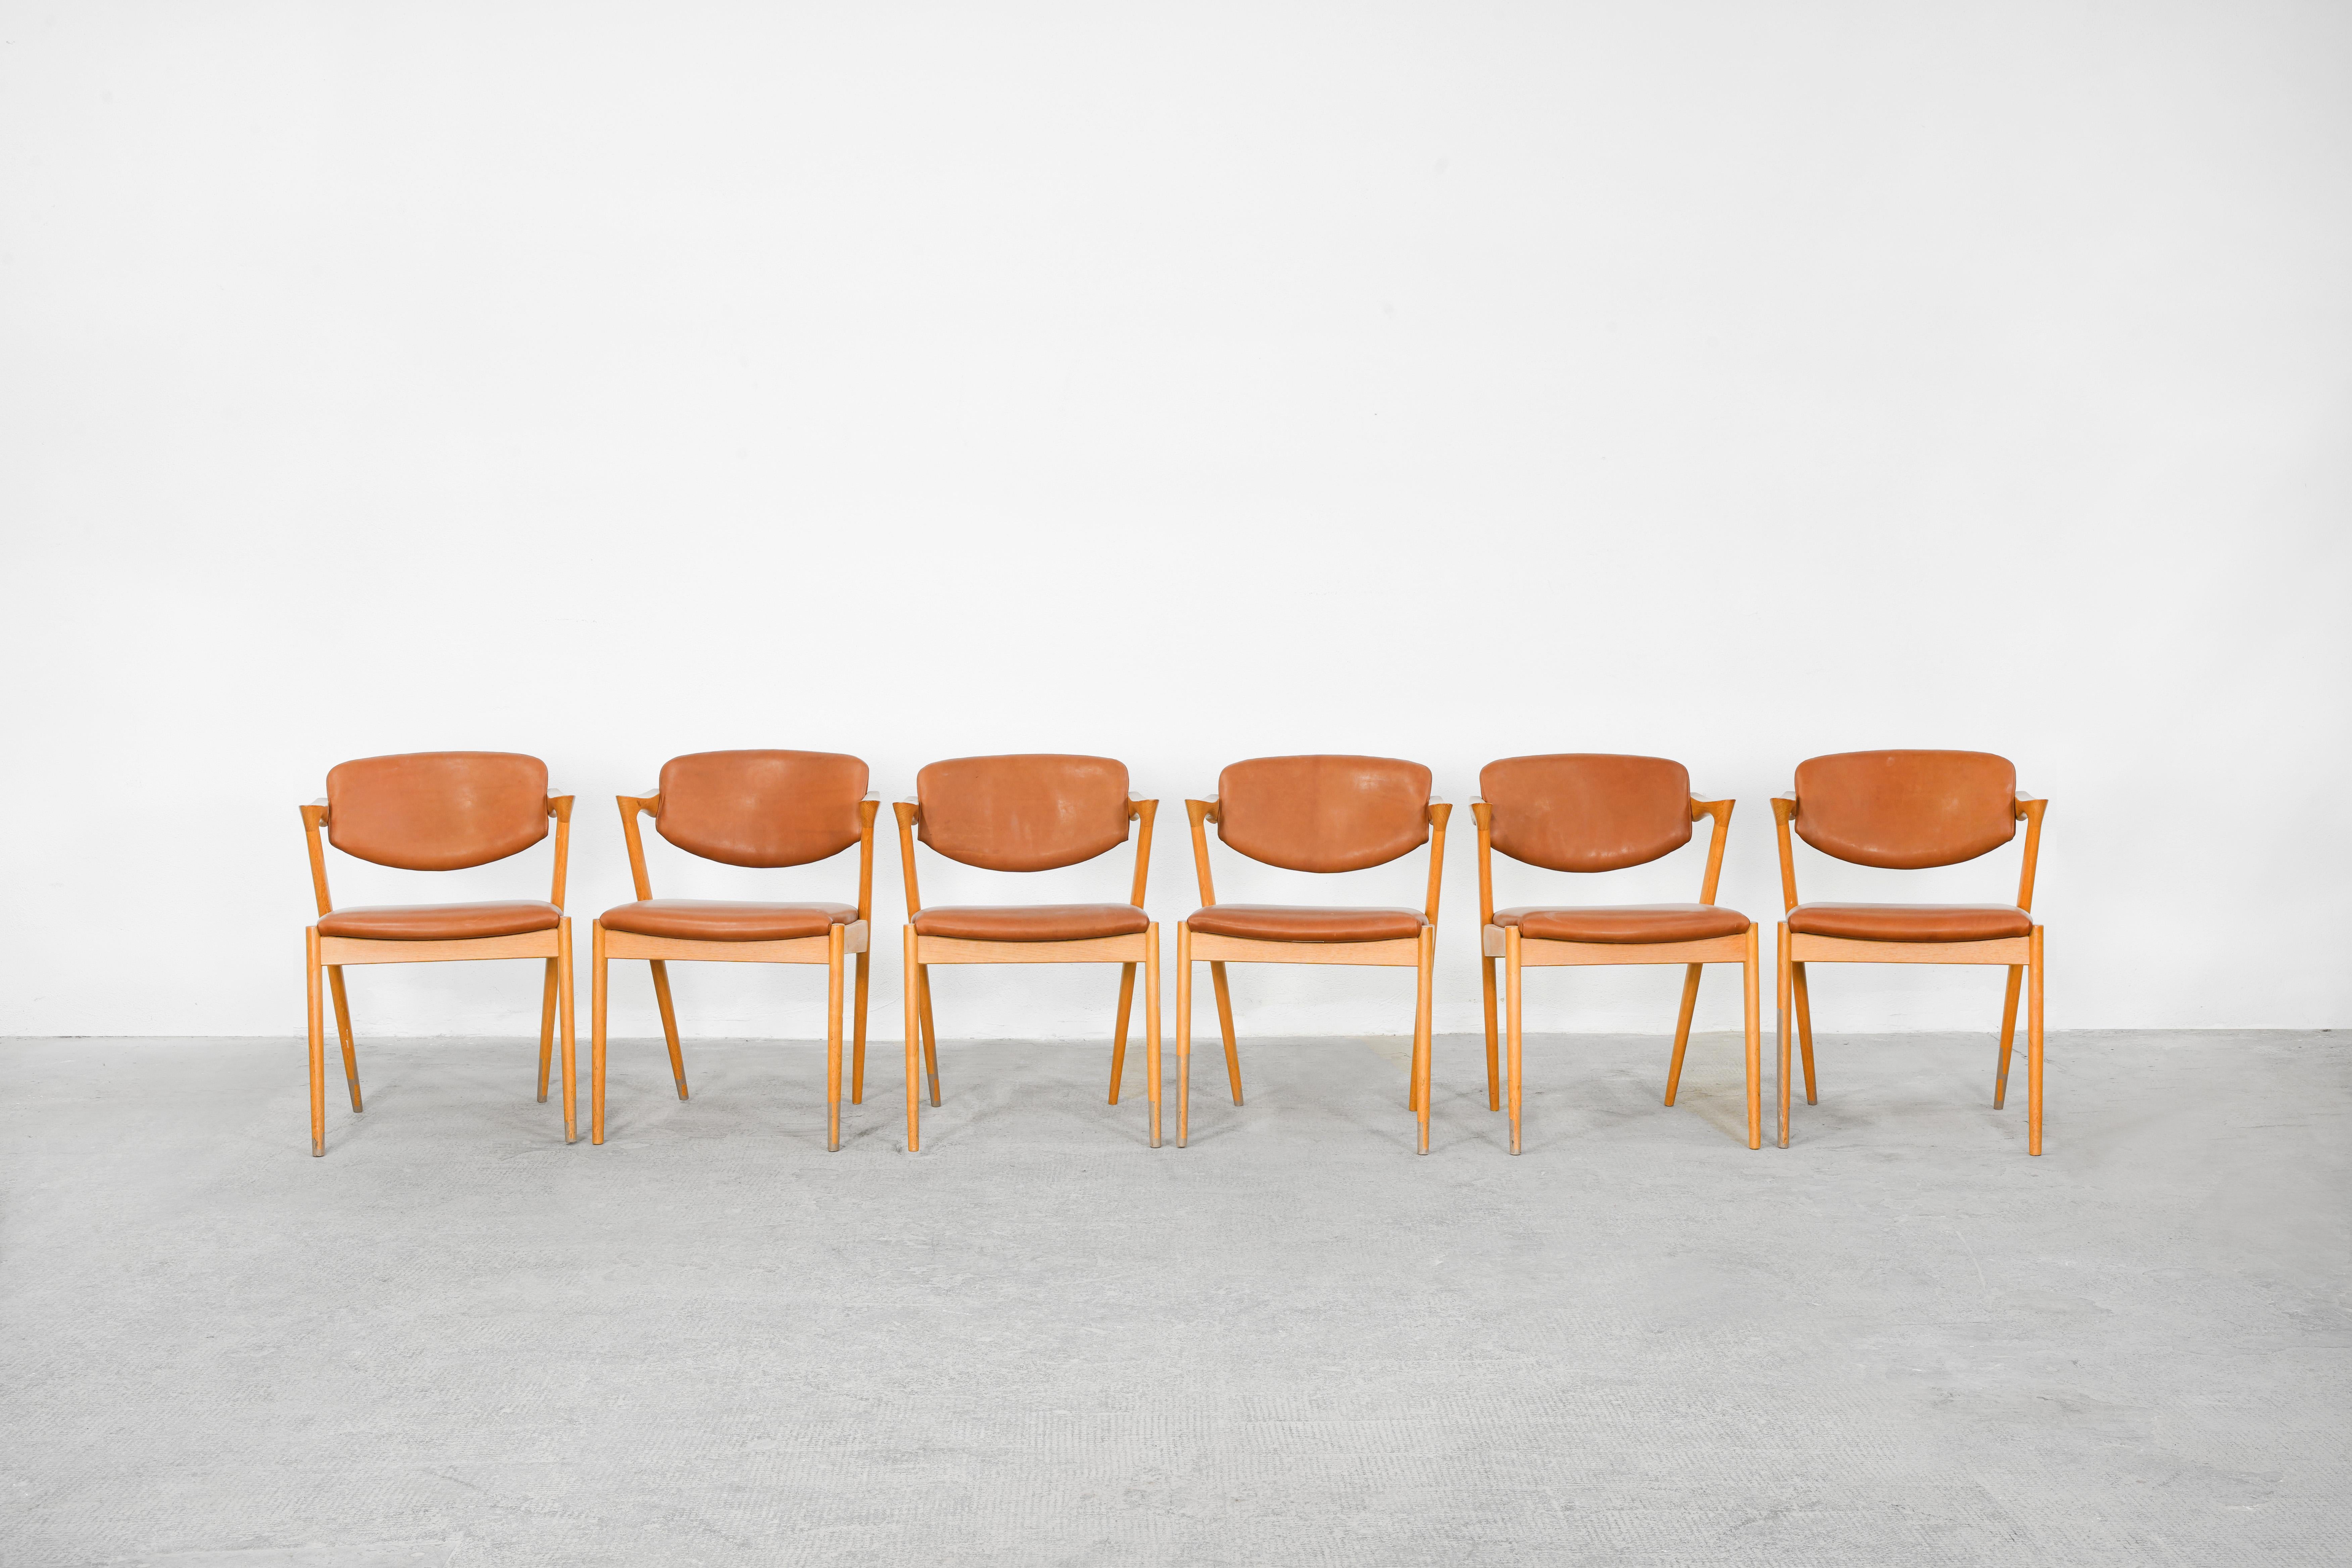 Very beautiful set of six dining chairs designed by Kai Kristiansen and produced by V. Schou Andersen, Denmark in 1964. The chairs are in very good condition, all of them were newly reupholstered with high-quality leather in brown and the frame is